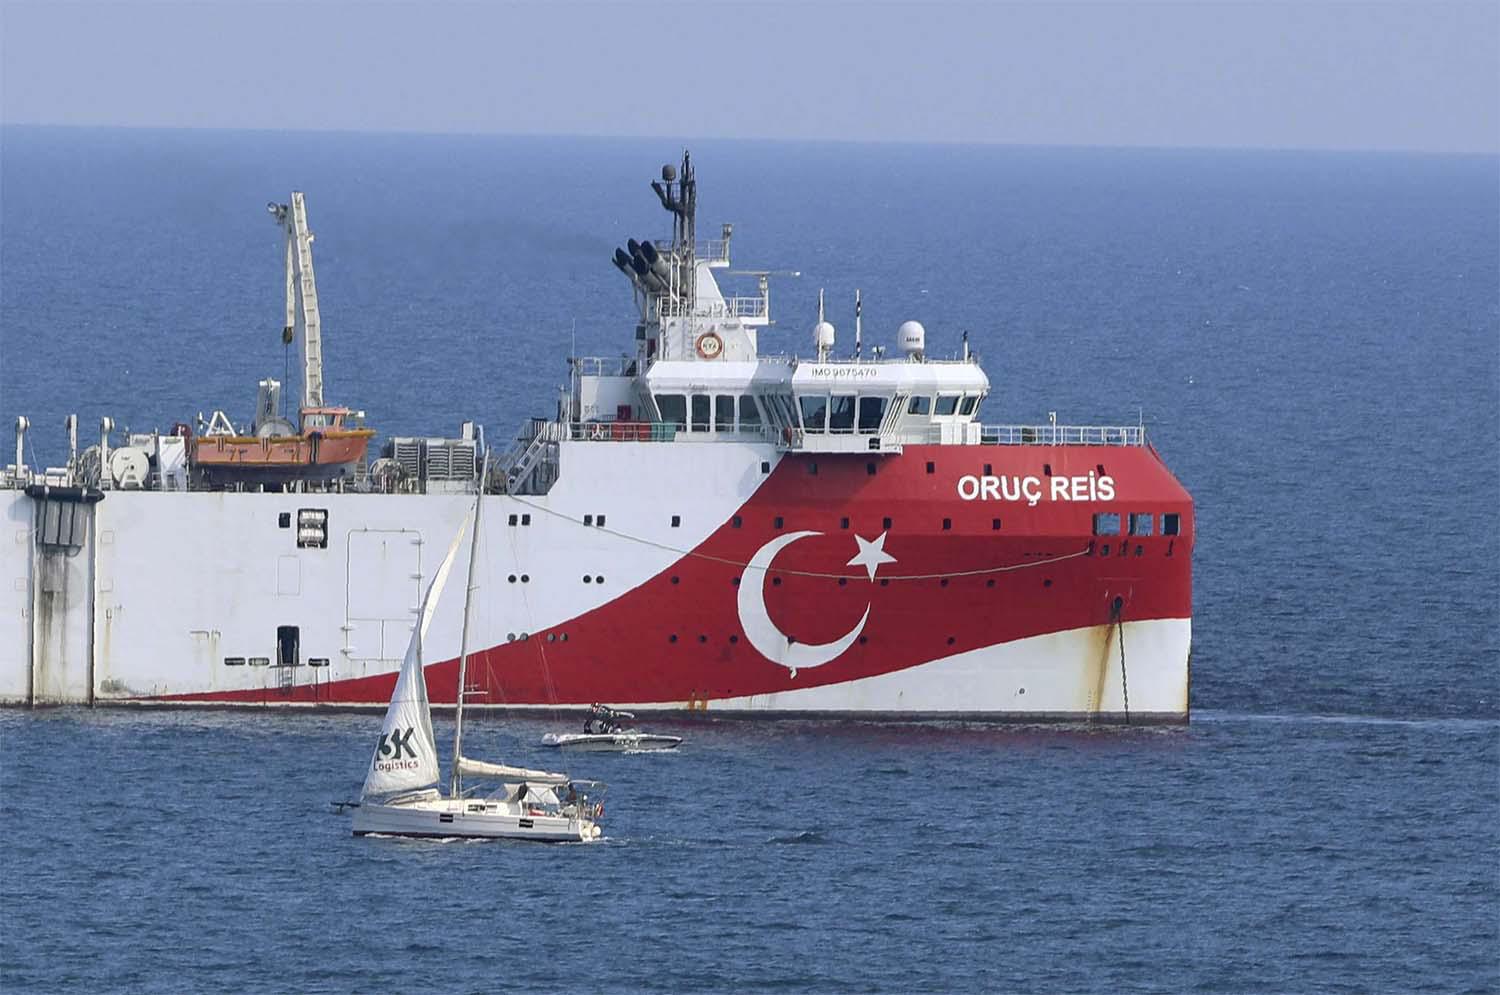 Turkish ship survey is south of Greek island of Rhodes